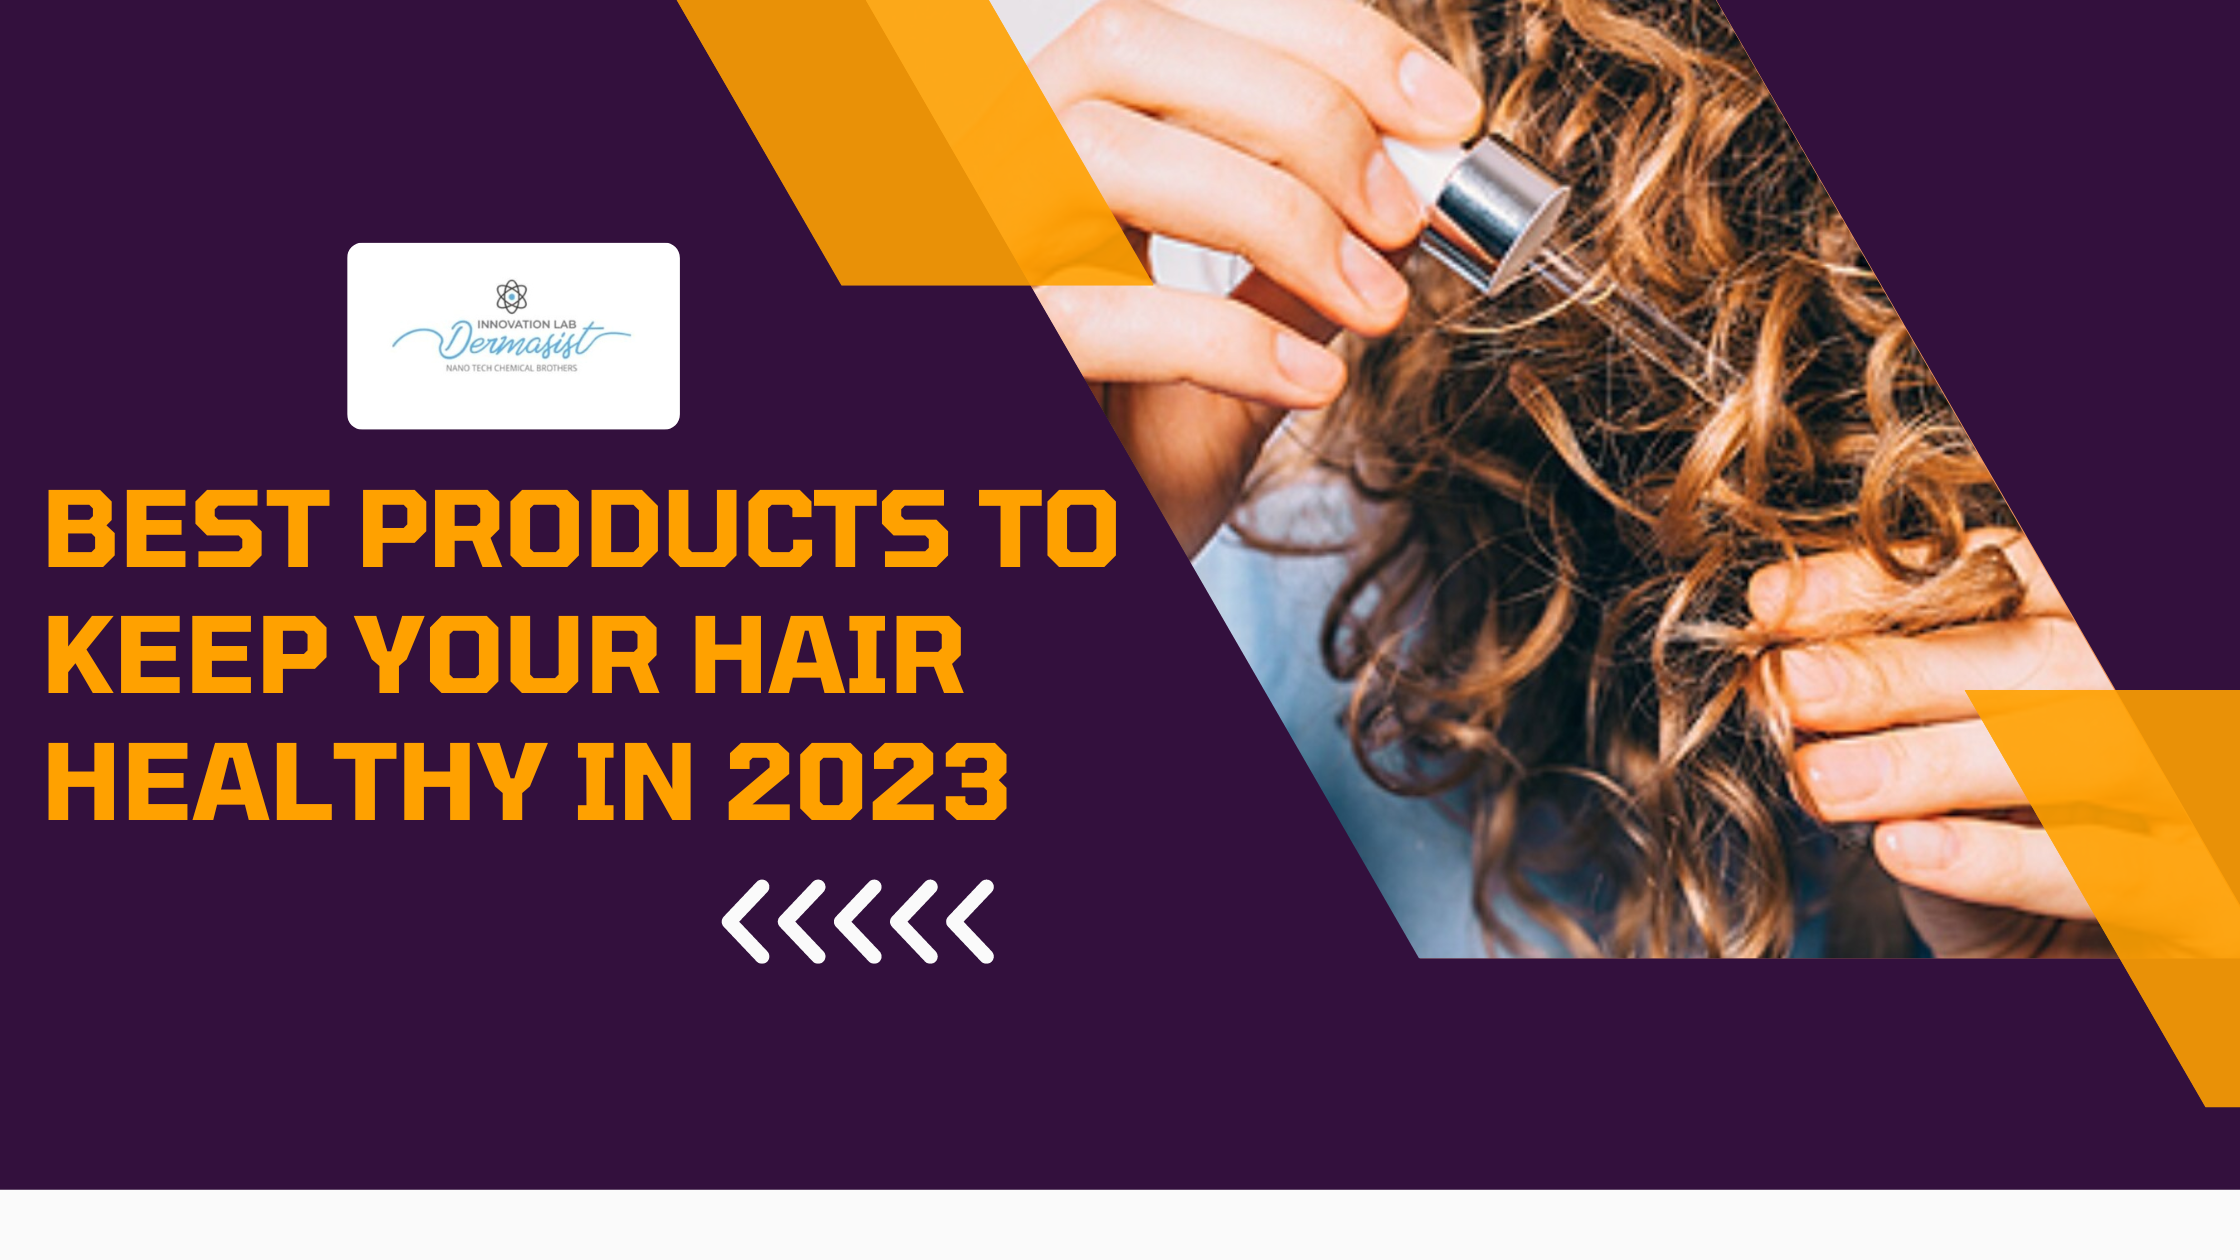 Best Products to Keep Your Hair Healthy in 2023